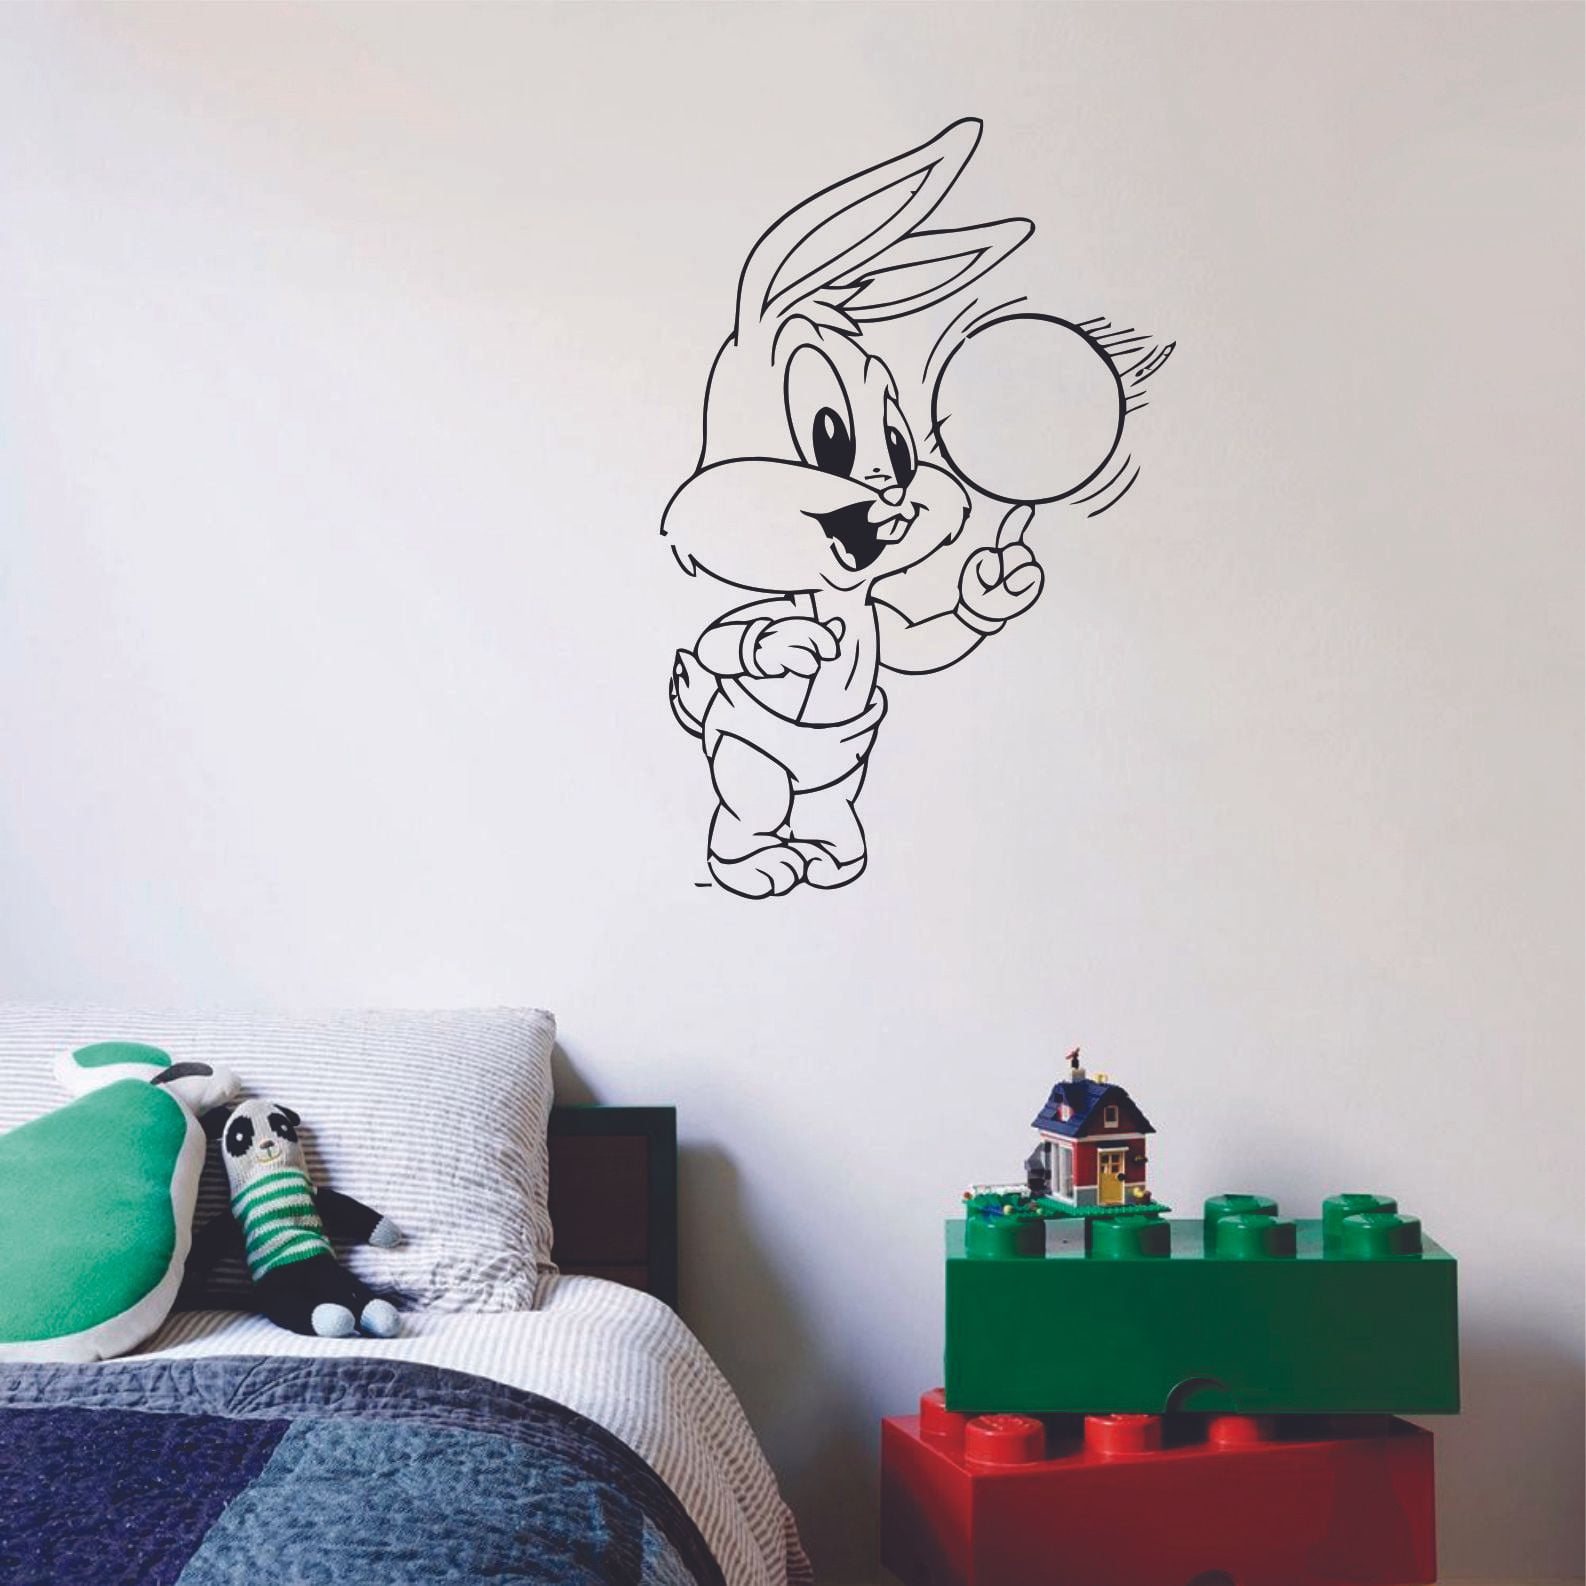 PHOTOPAPER 10 looney tunes WALL STICKERS 3 SIZES VINYL 